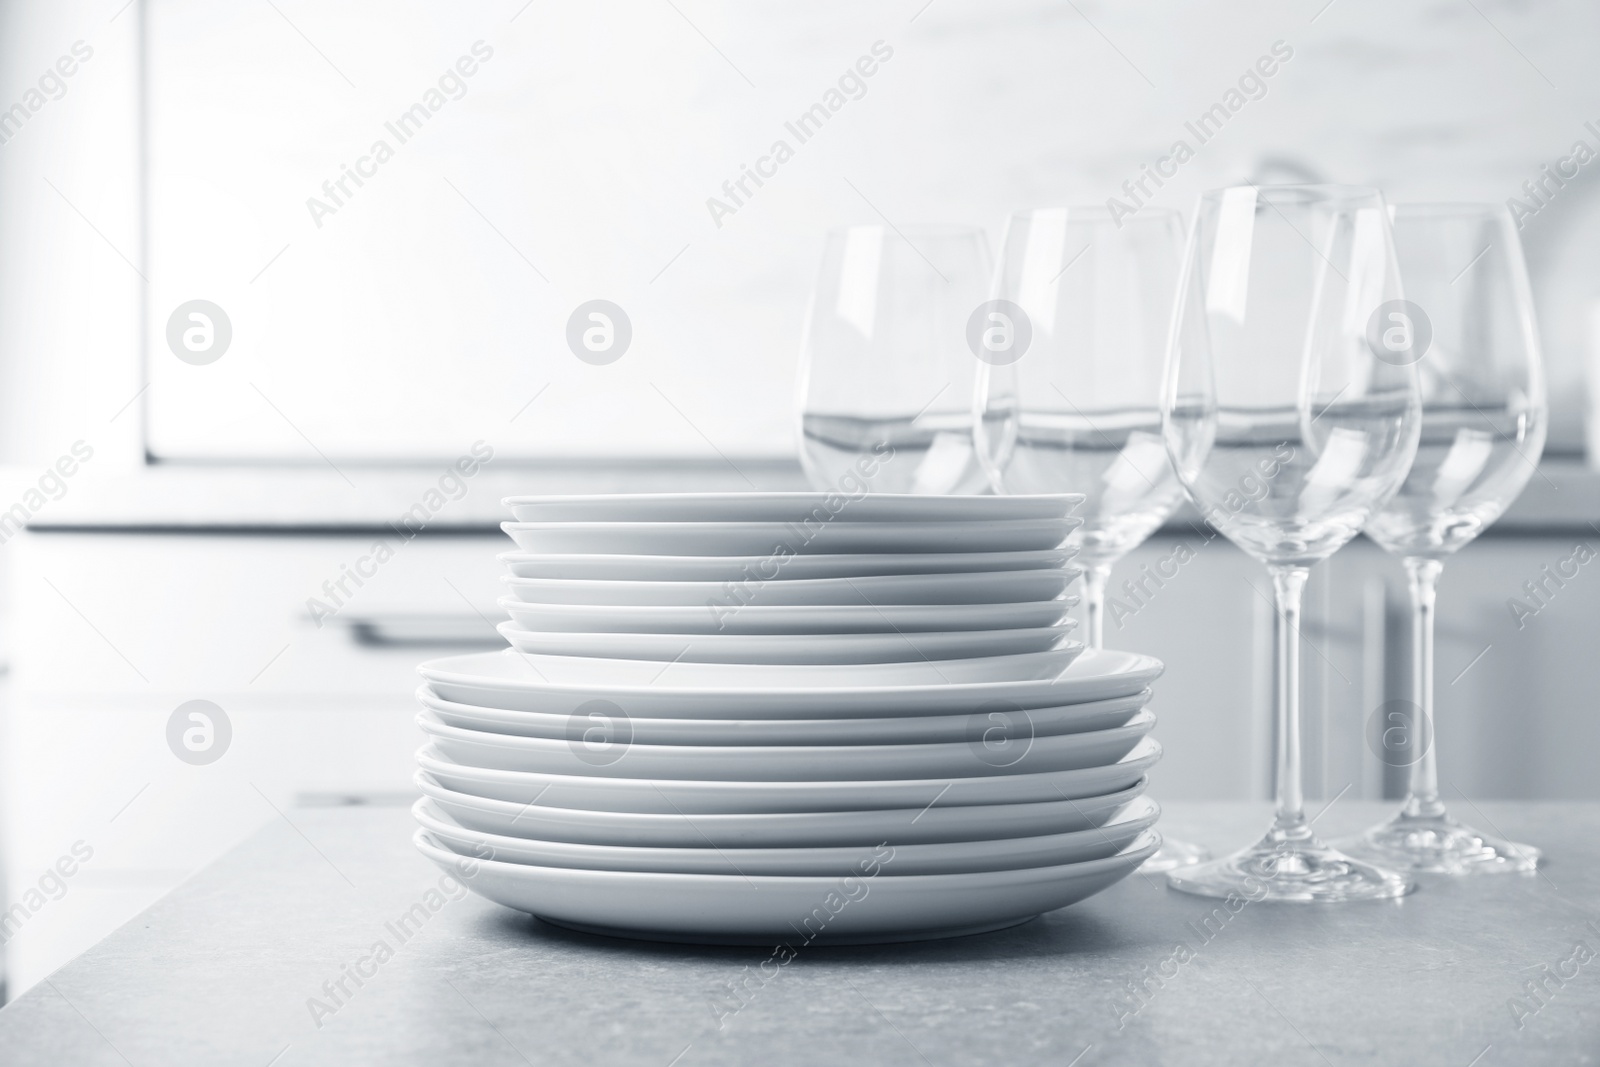 Photo of Set of clean dishes on table in kitchen